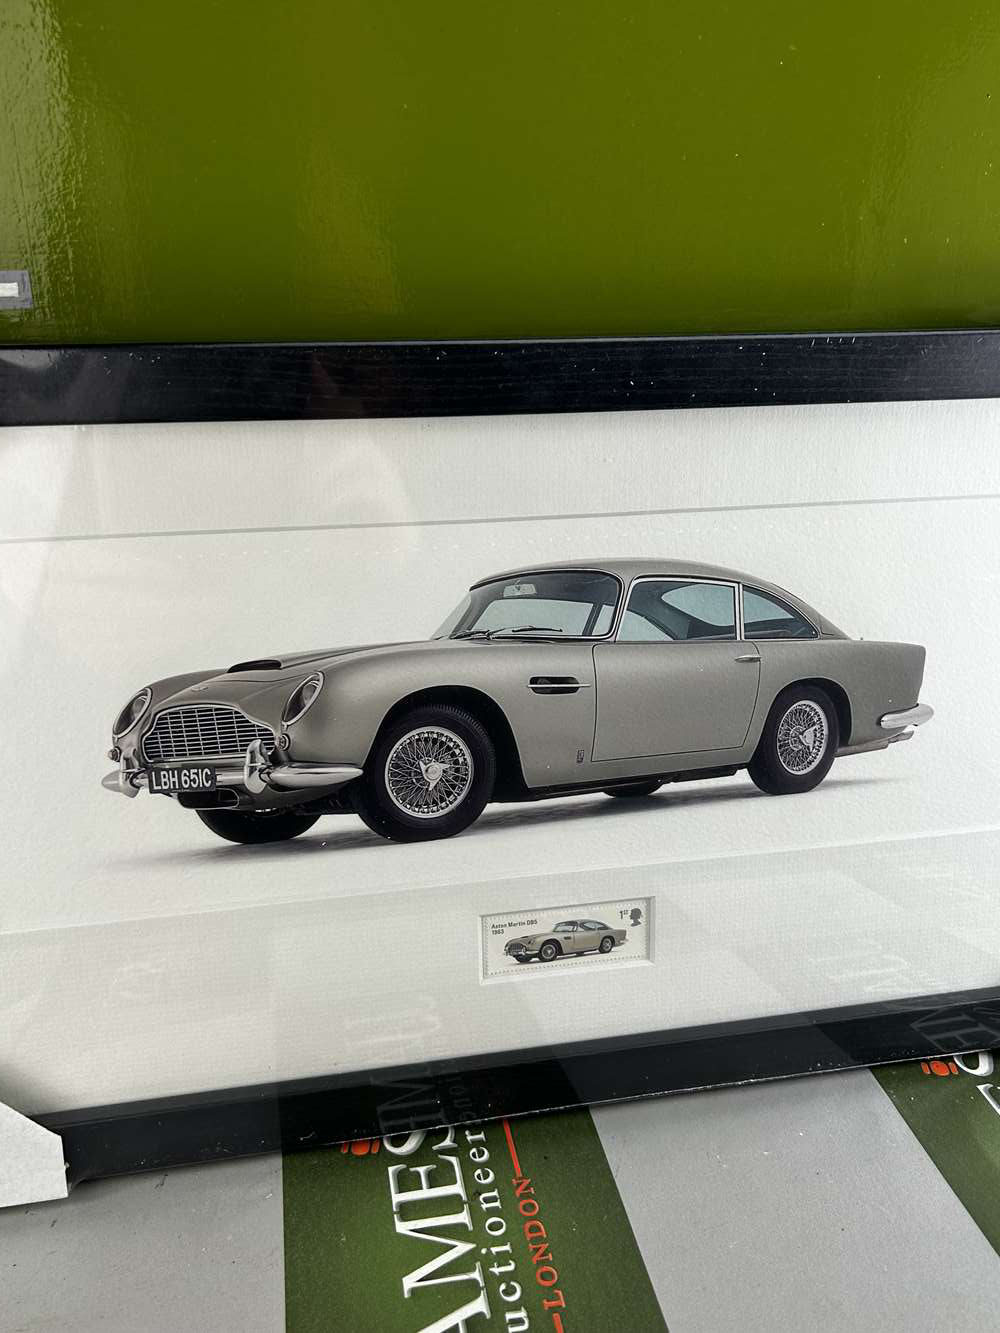 British Auto Legends -Aston Martin DB5 Framed Picture &#038; 1st Class Stamp Montage. - Image 5 of 6